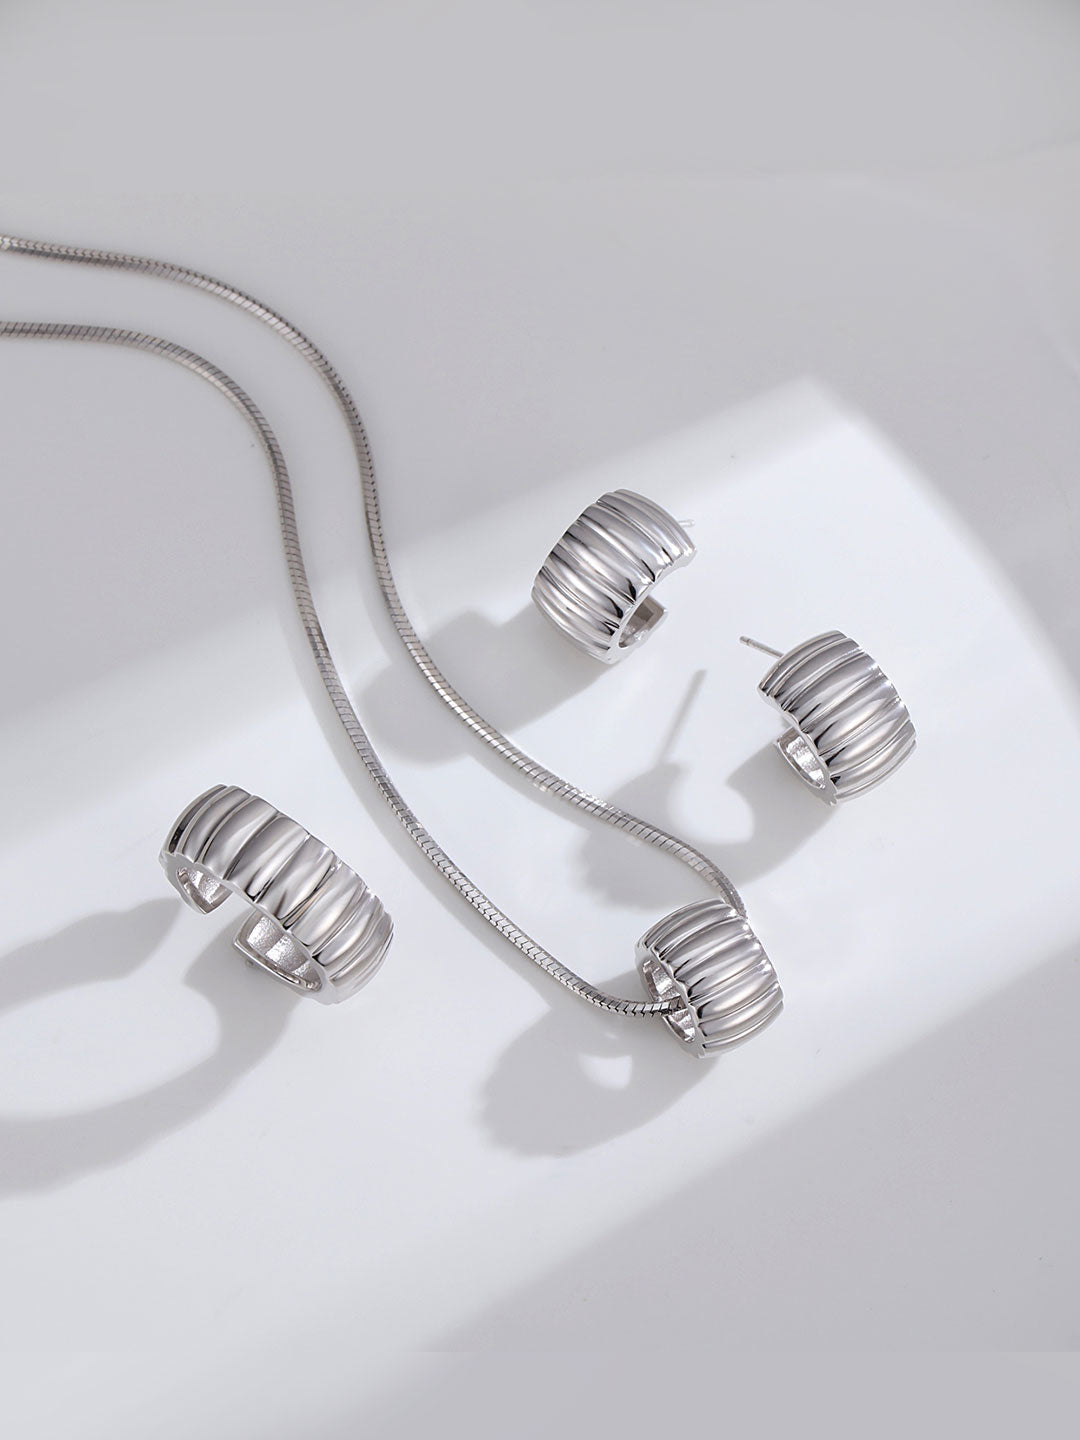 Sleek Gear Series: Pure Silver Necklace with Unique Texture